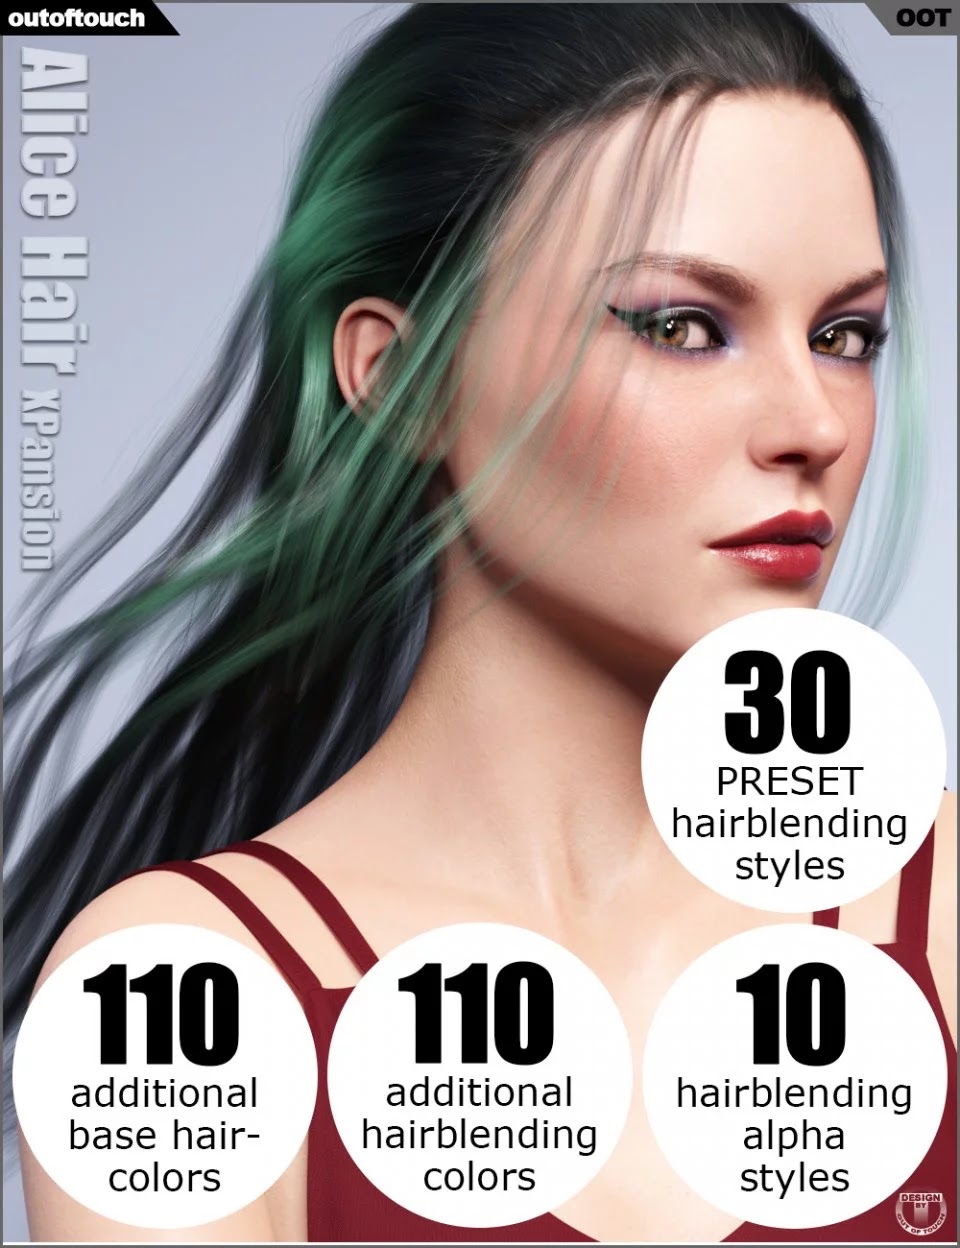 OOT Hairblending 2.0 Texture XPansion for Alice Wet and Dry Hair_DAZ3DDL